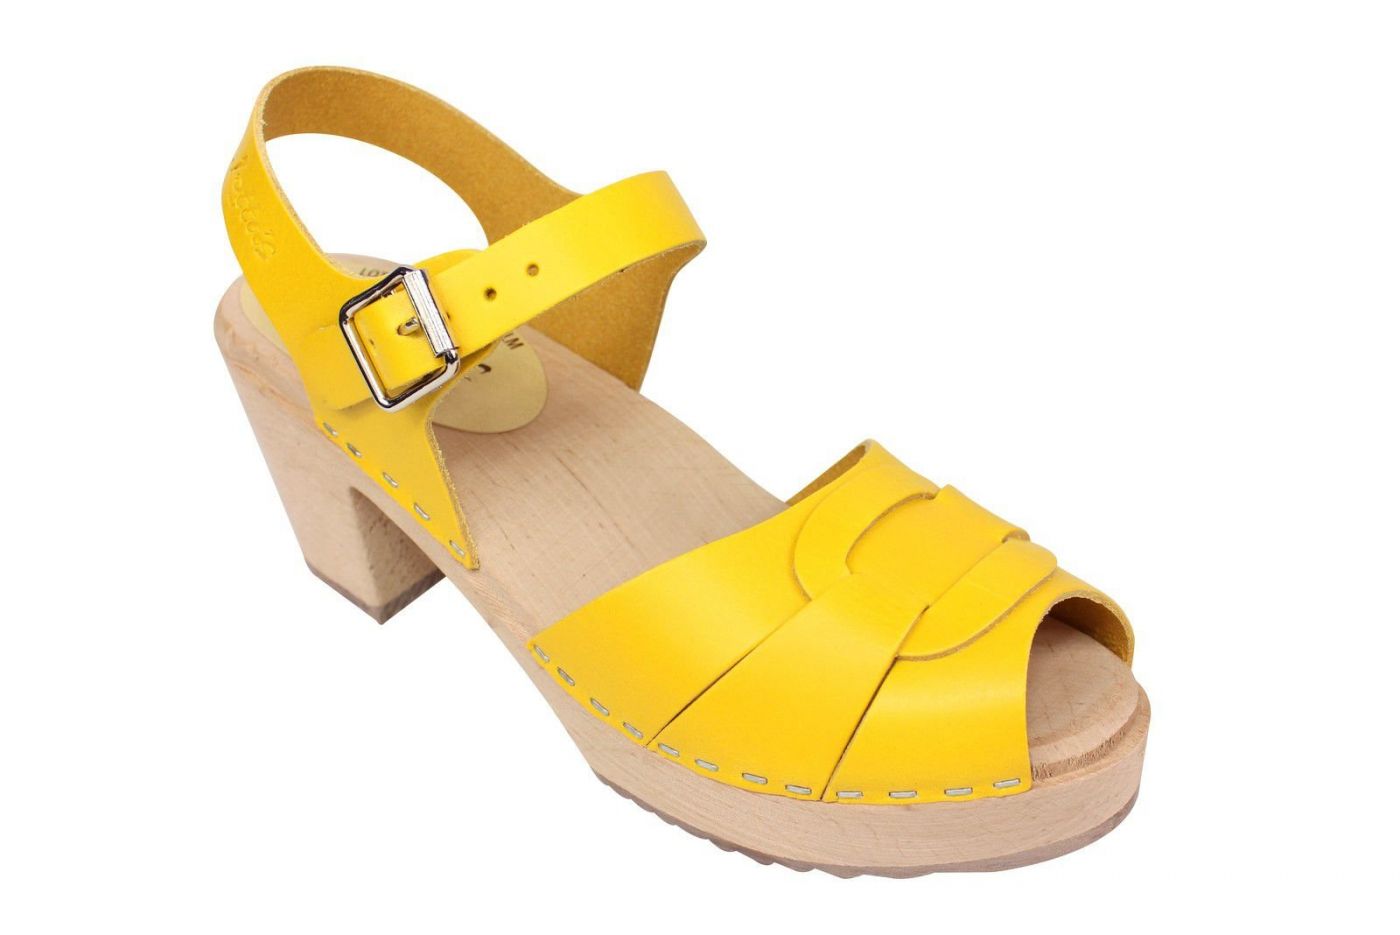 Lotta From Stockholm : Womens High Heel Peep Toe Wooden Clogs in Summer ...